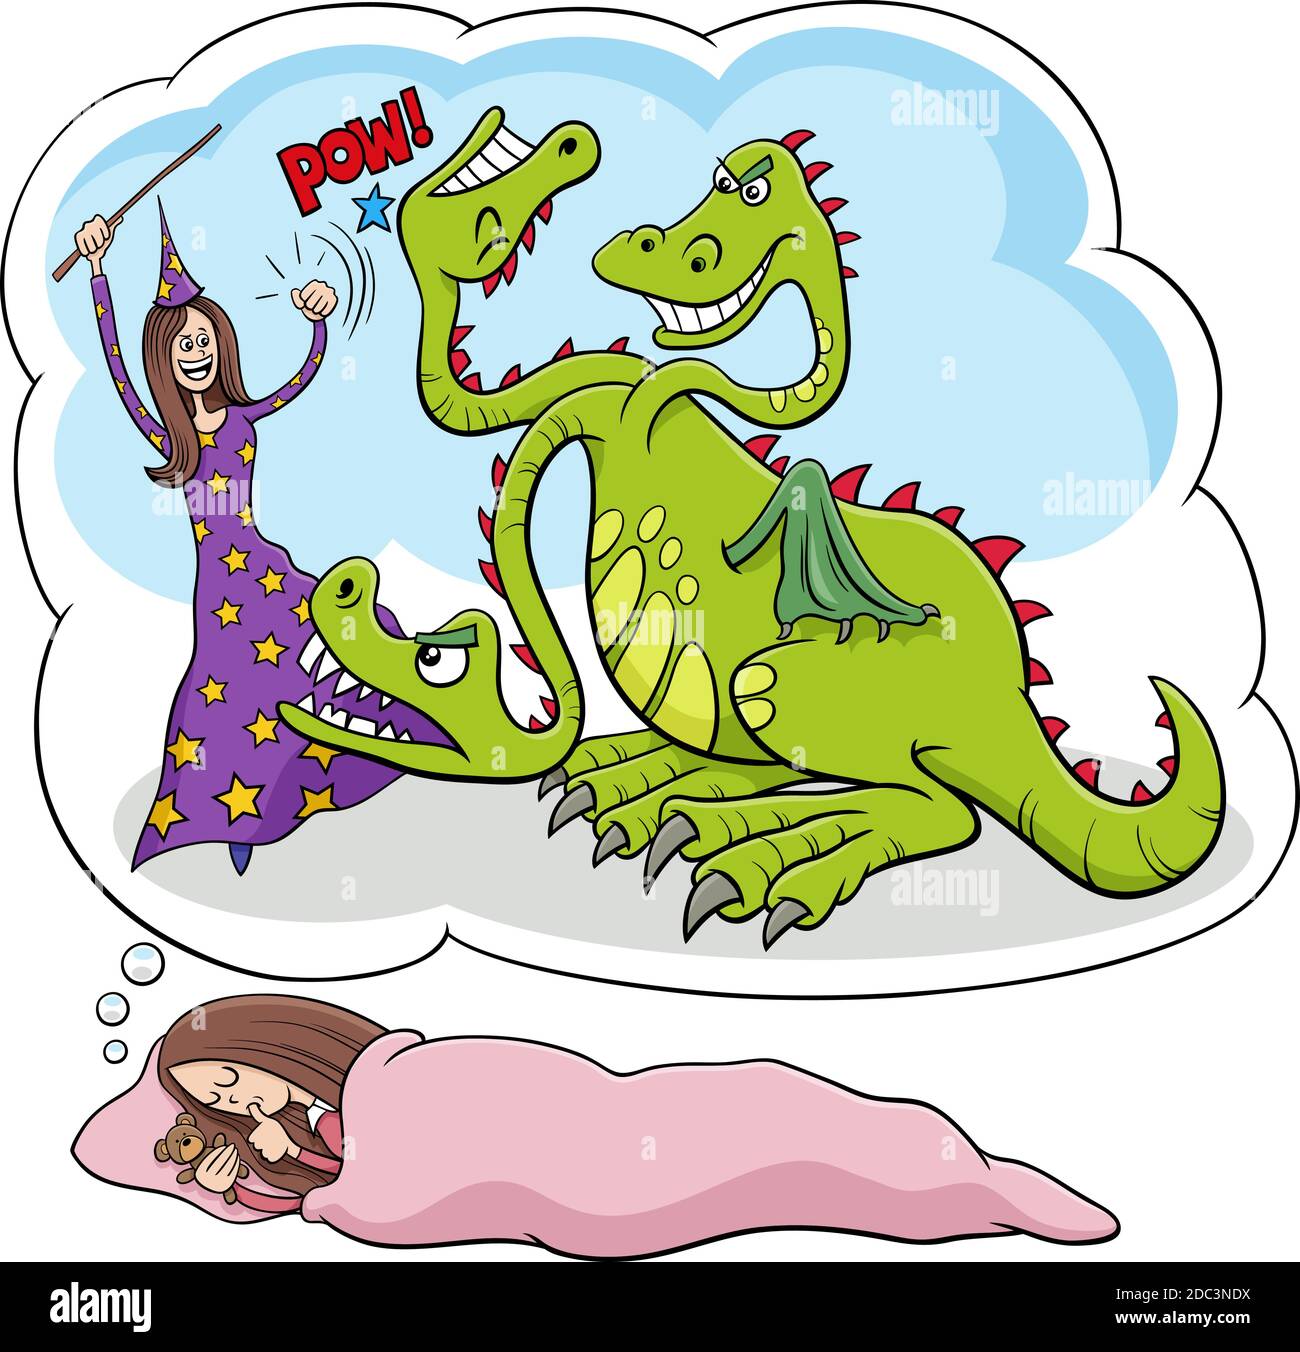 Cartoon illustration of sleeping young girl dreaming about defeating the dragon Stock Vector